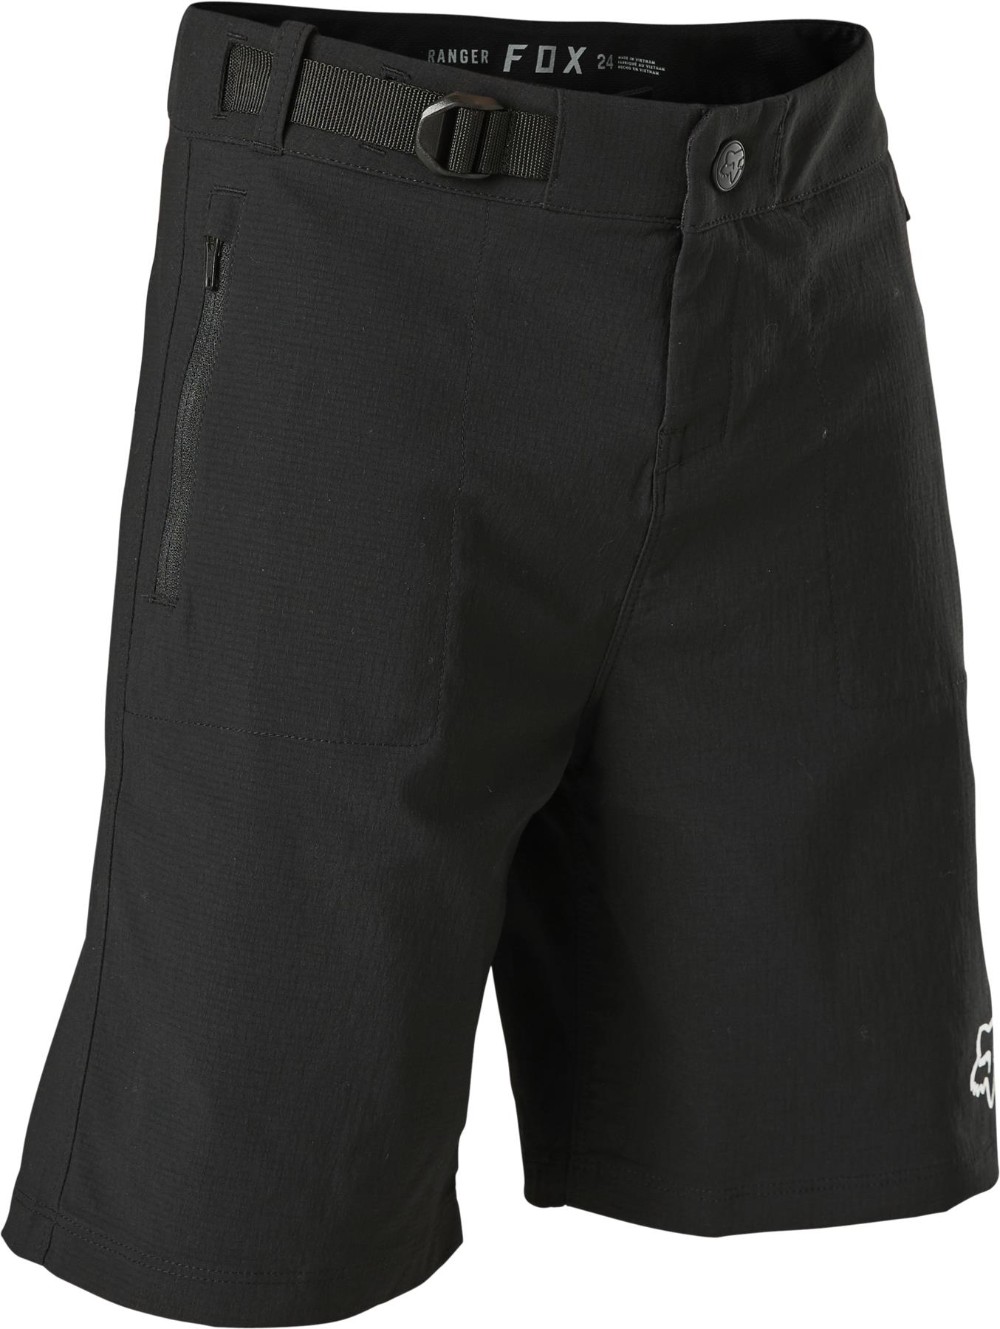 Ranger Youth MTB Cycling Shorts with Liner image 0